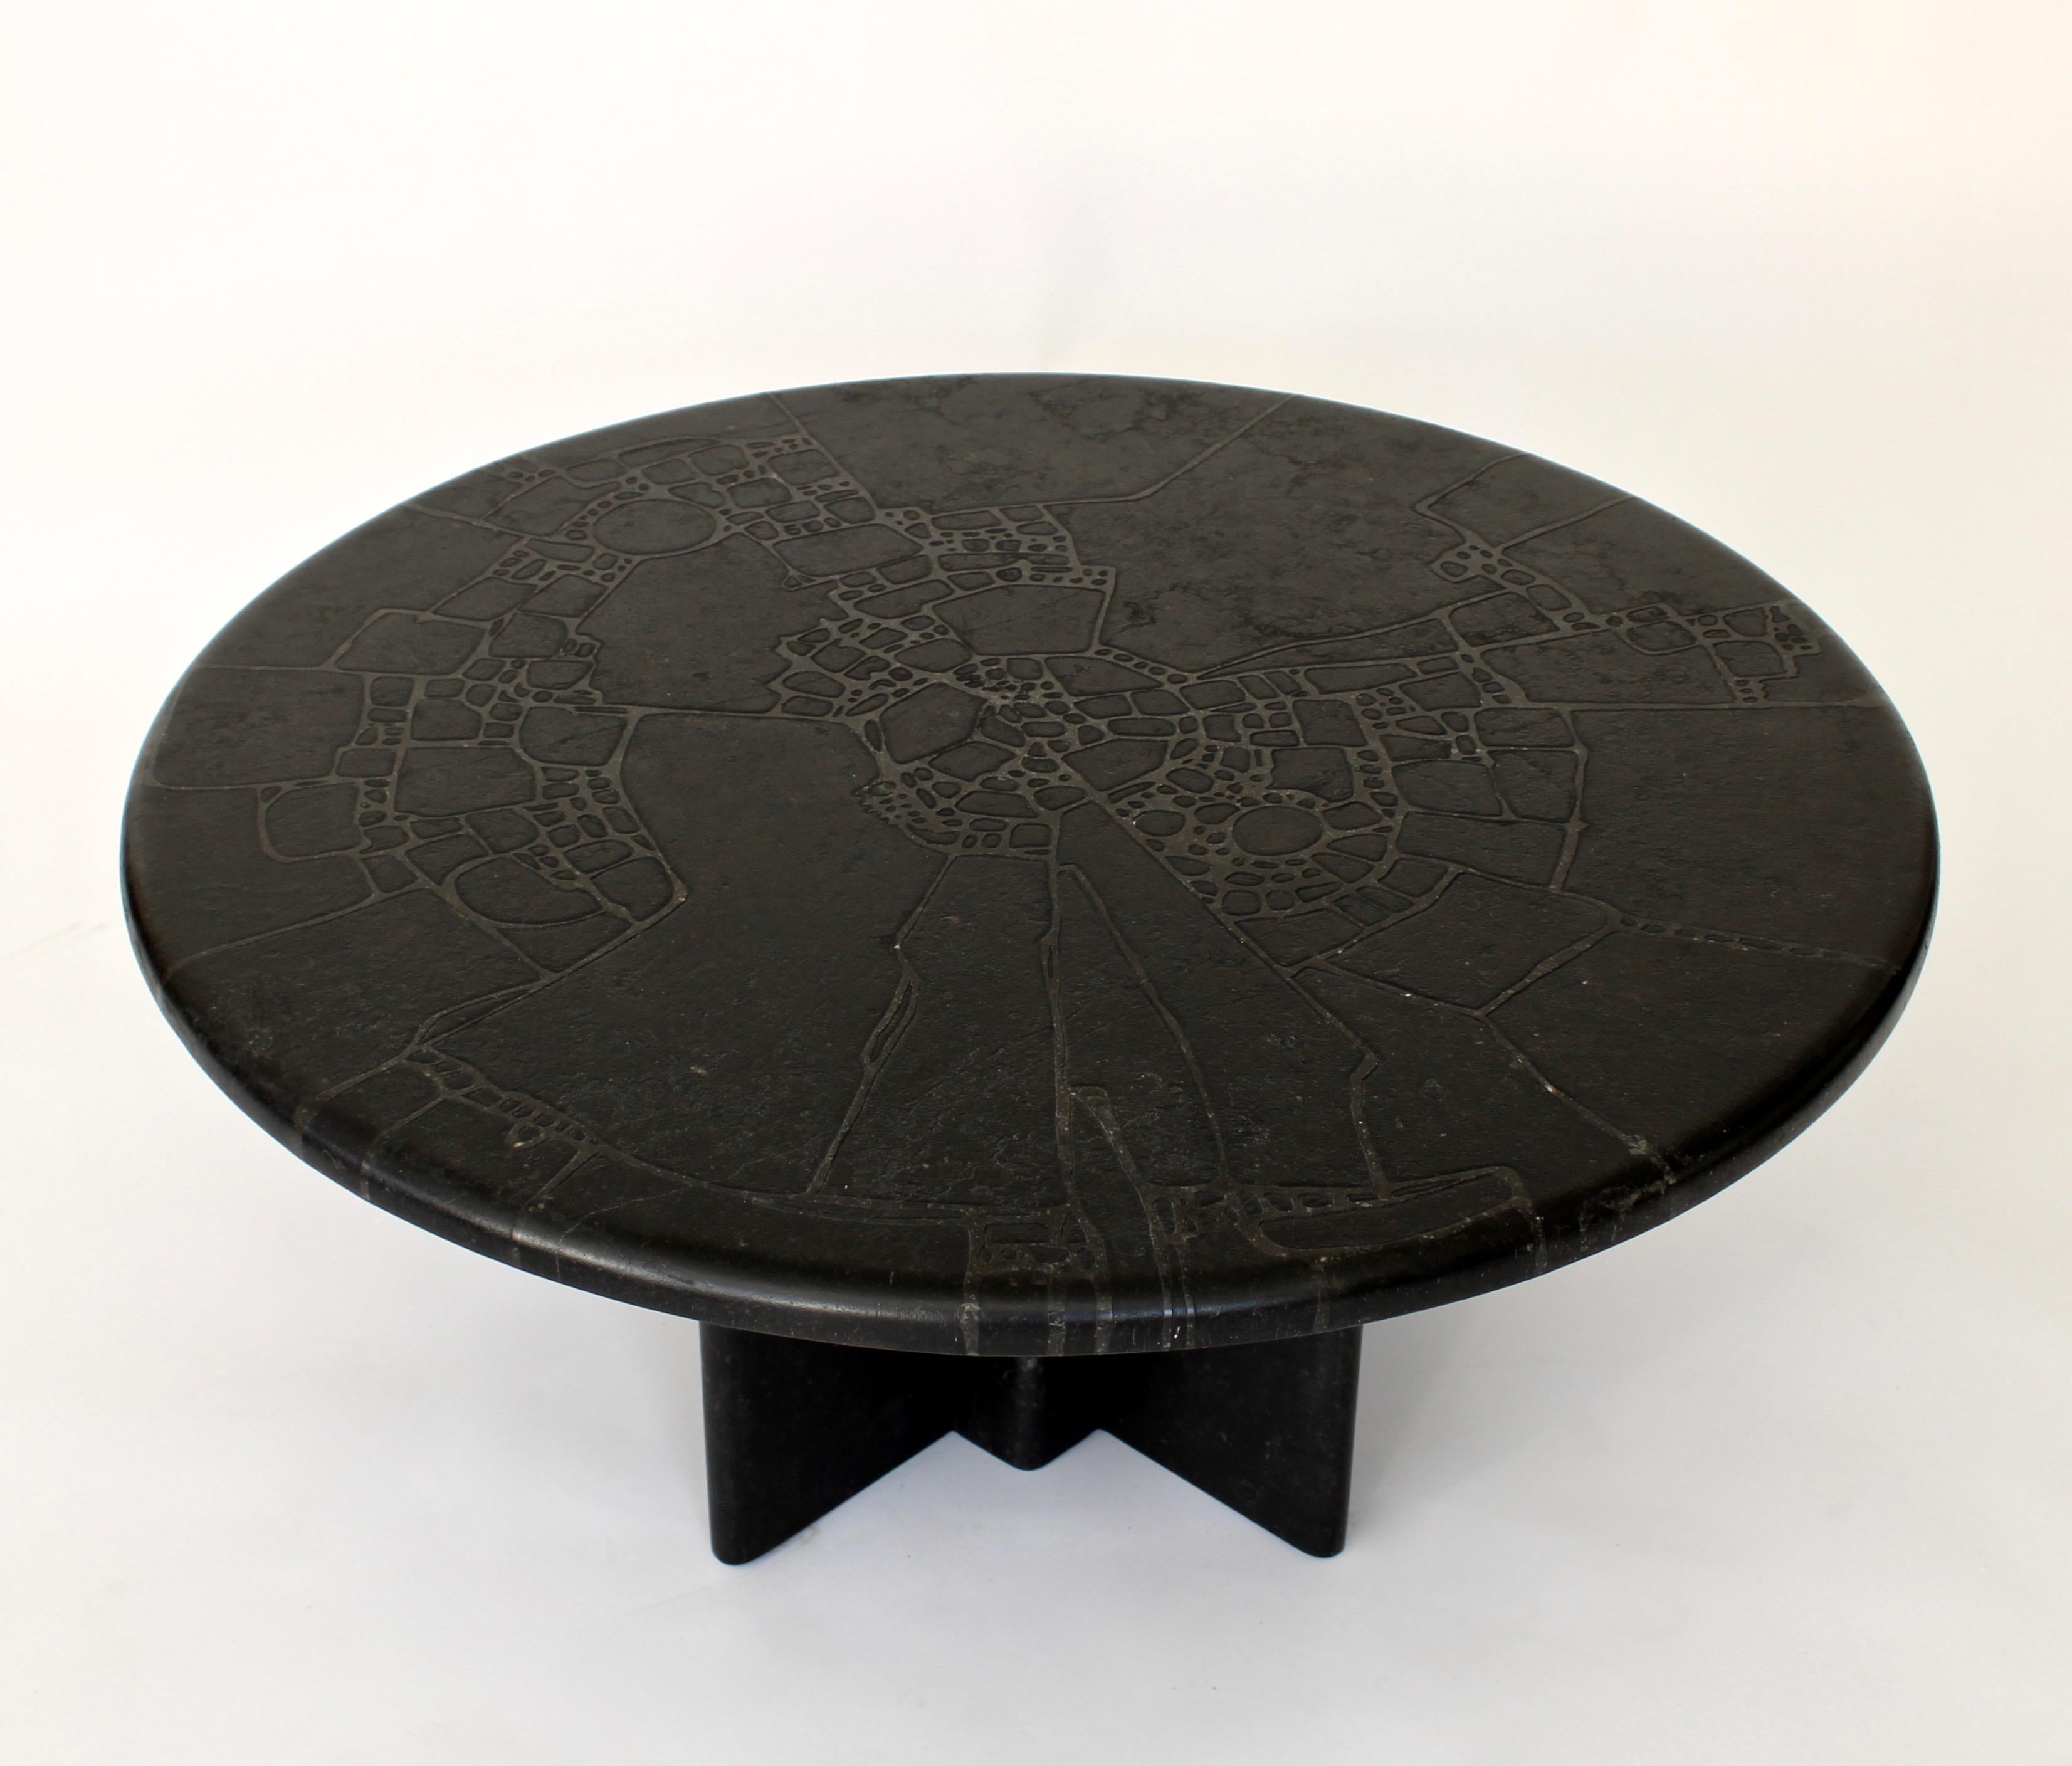 French carved, engraved or incised technique black marble round coffee table.
The top has an carved or engraved pattern resembling a landscape but also is very abstract. The engraving penetrates the marble at about 1/16